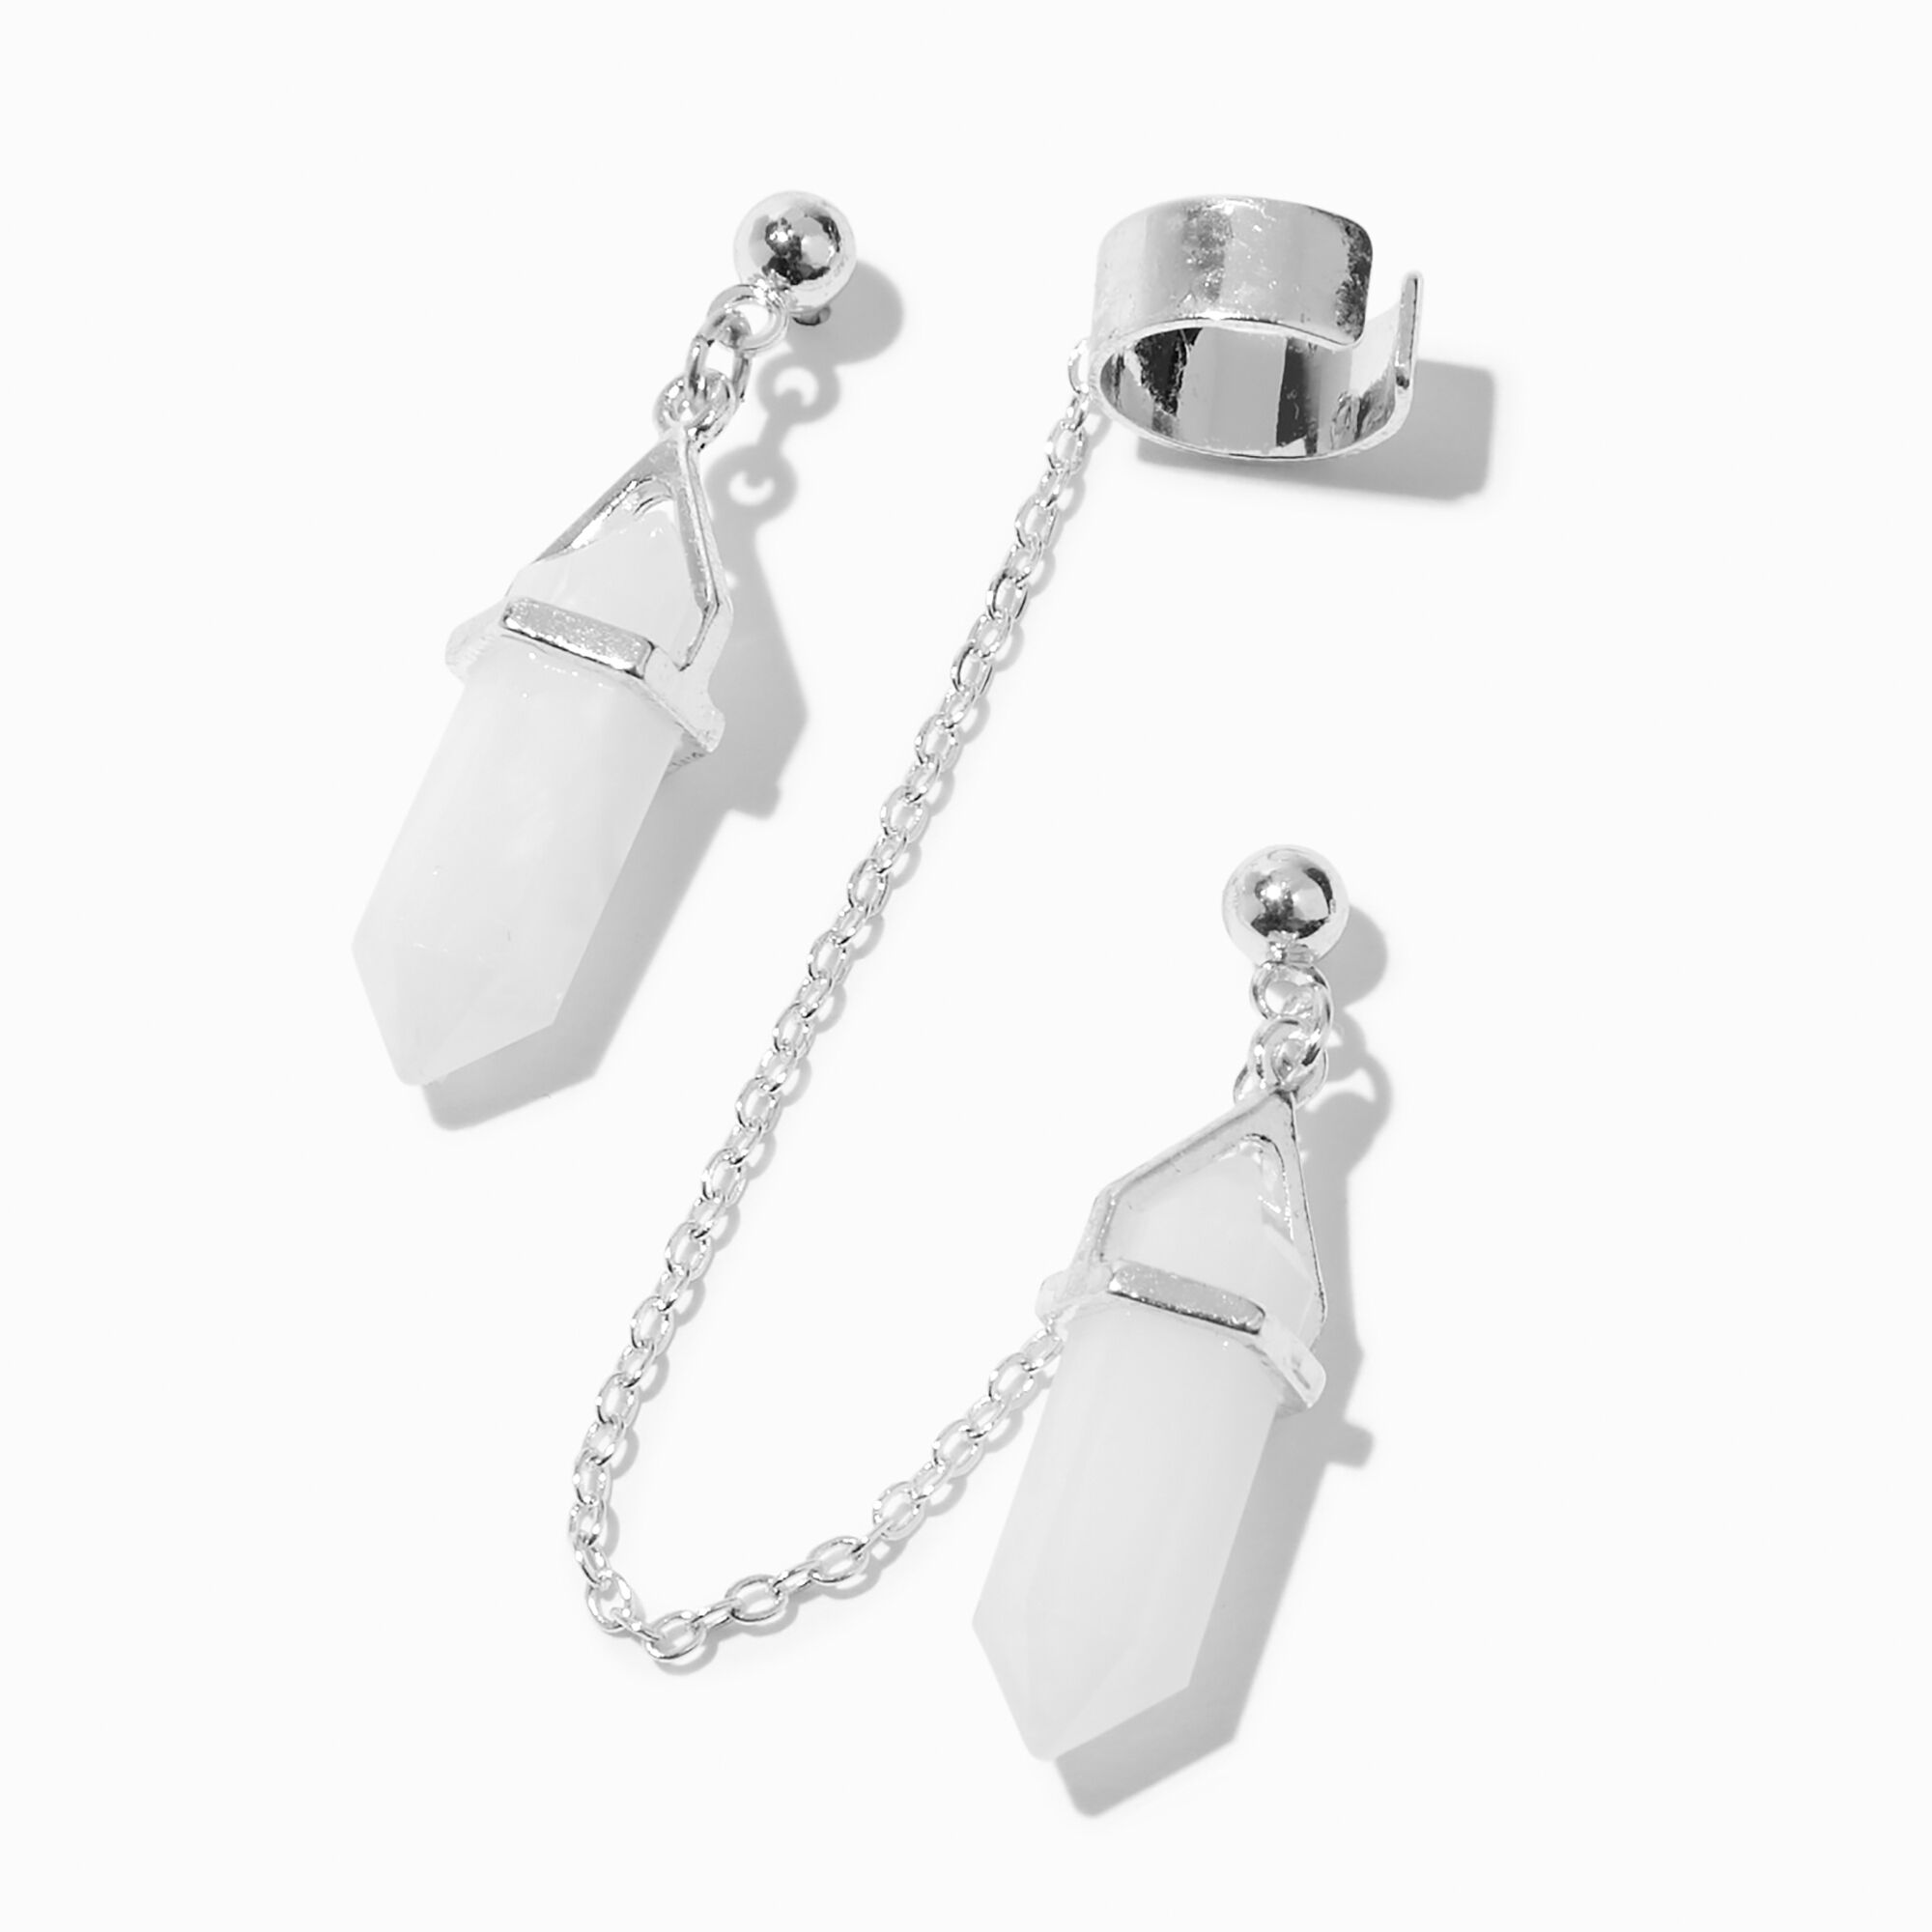 View Claires Mystical Gem SilverTone Cuff Connector Drop Earrings White information